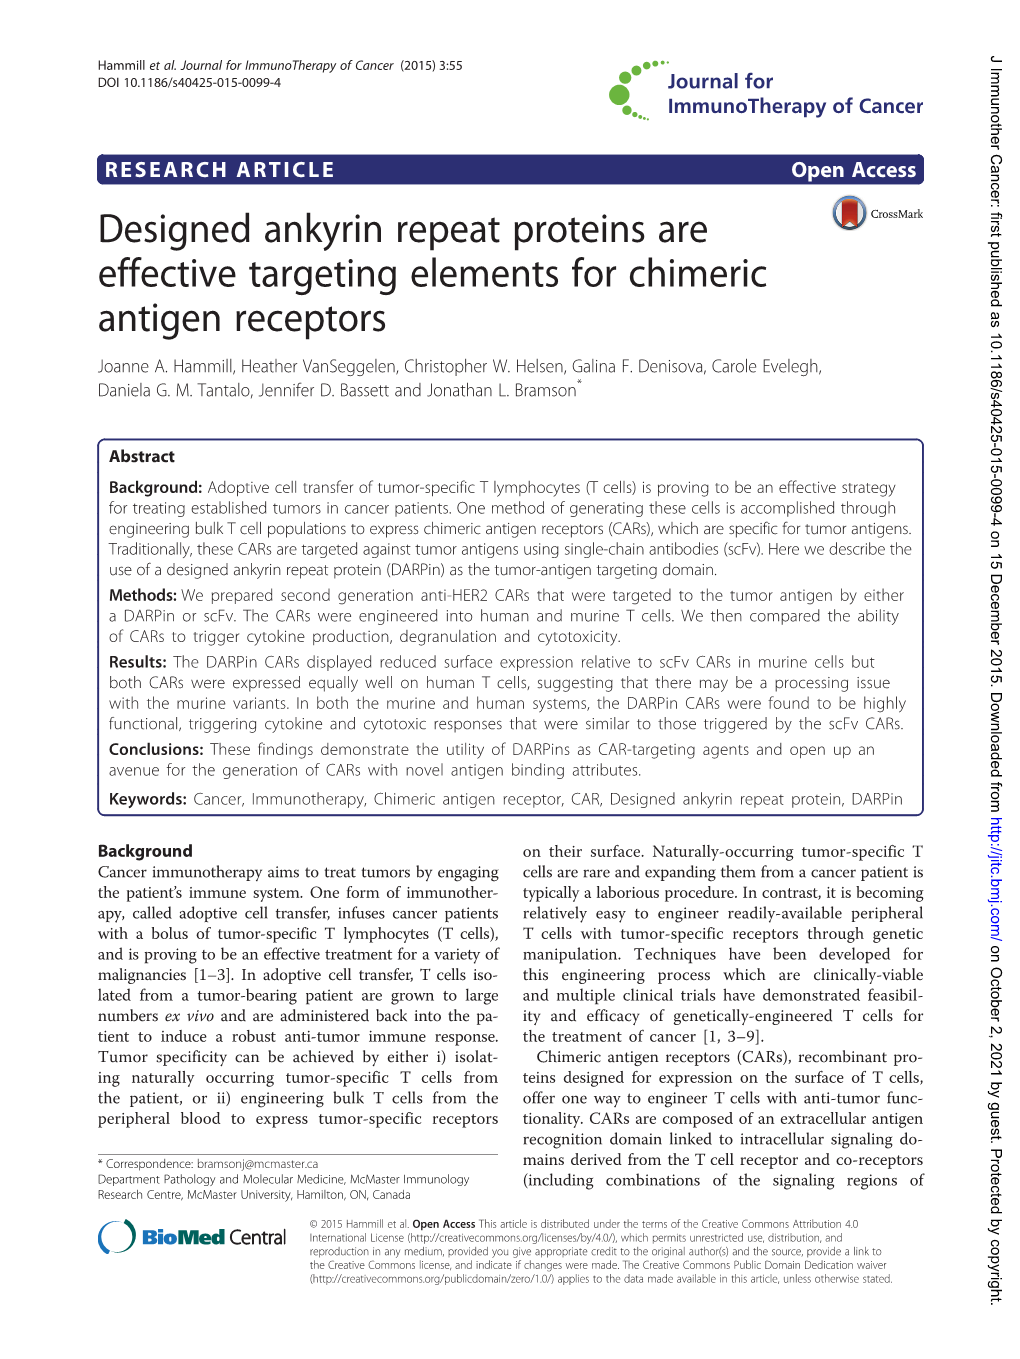 Designed Ankyrin Repeat Proteins Are Effective Targeting Elements for Chimeric Antigen Receptors Joanne A